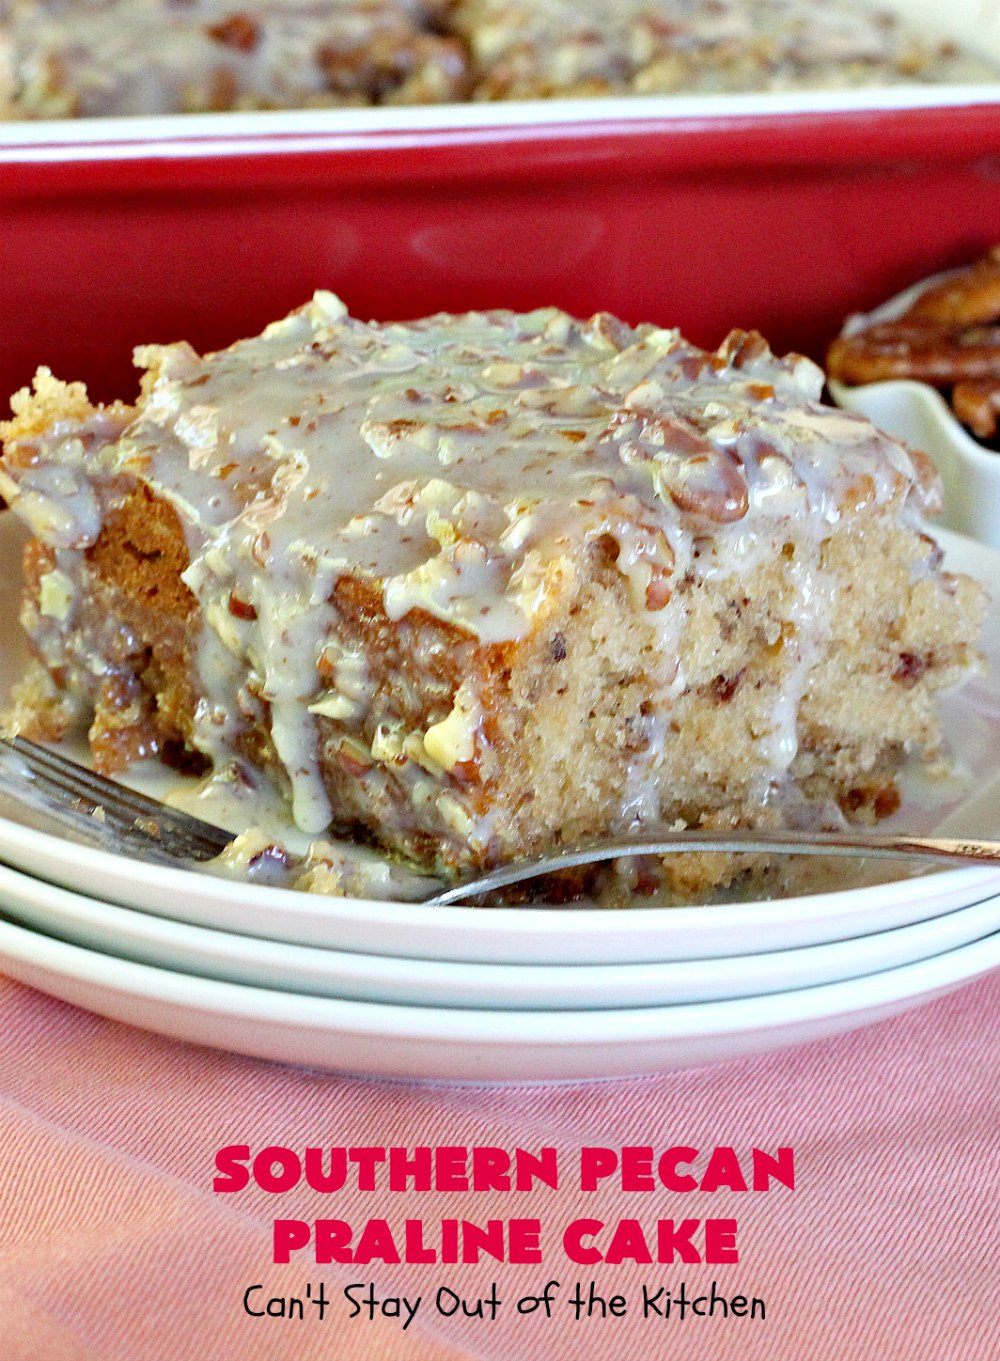 Southern Pecan Praline Cake – Can't Stay Out of the Kitchen